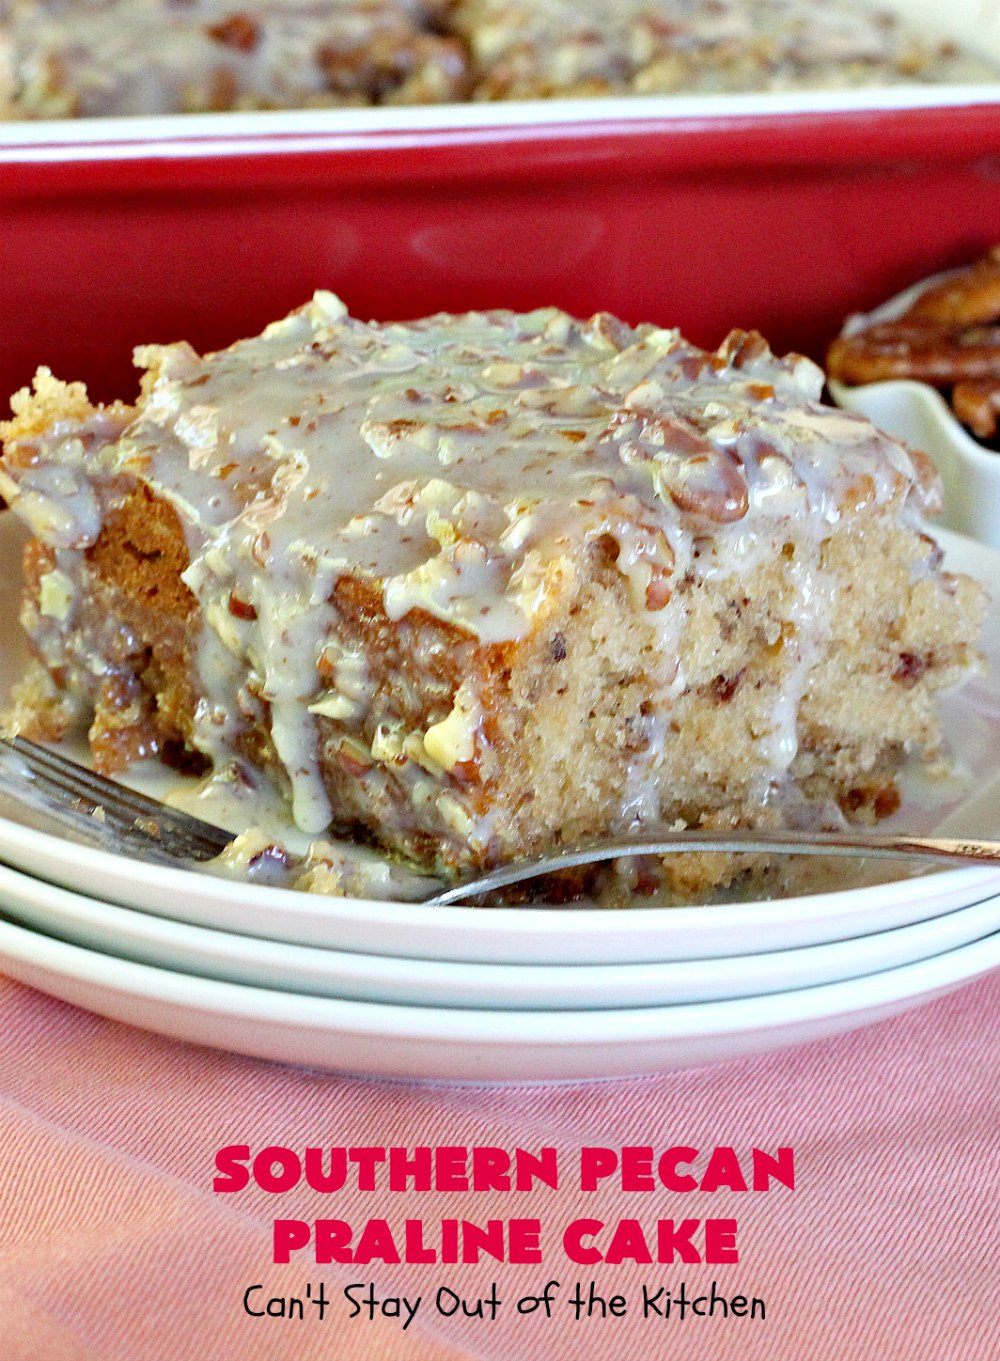 Southern Pecan Praline Cake – Can't Stay Out of the Kitchen